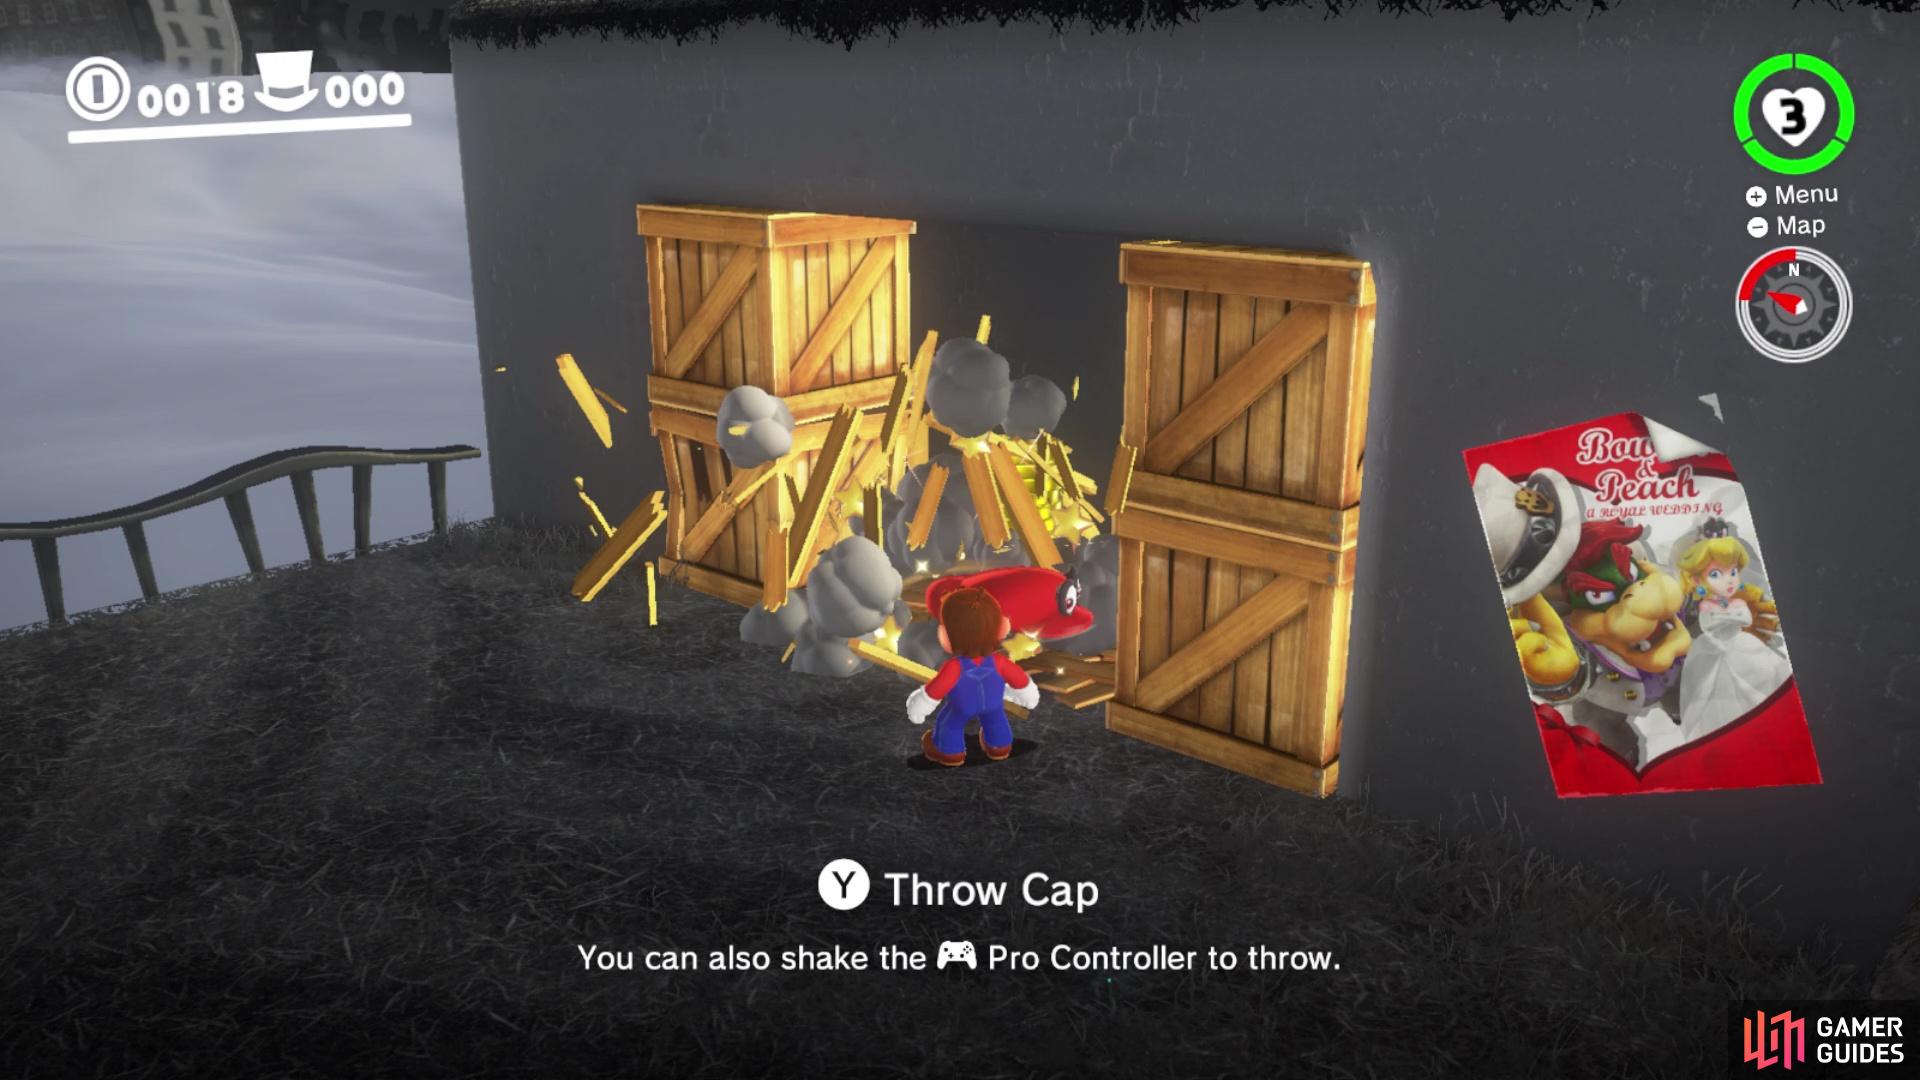 Cappy is extremely useful for a lot of things, like breaking boxes